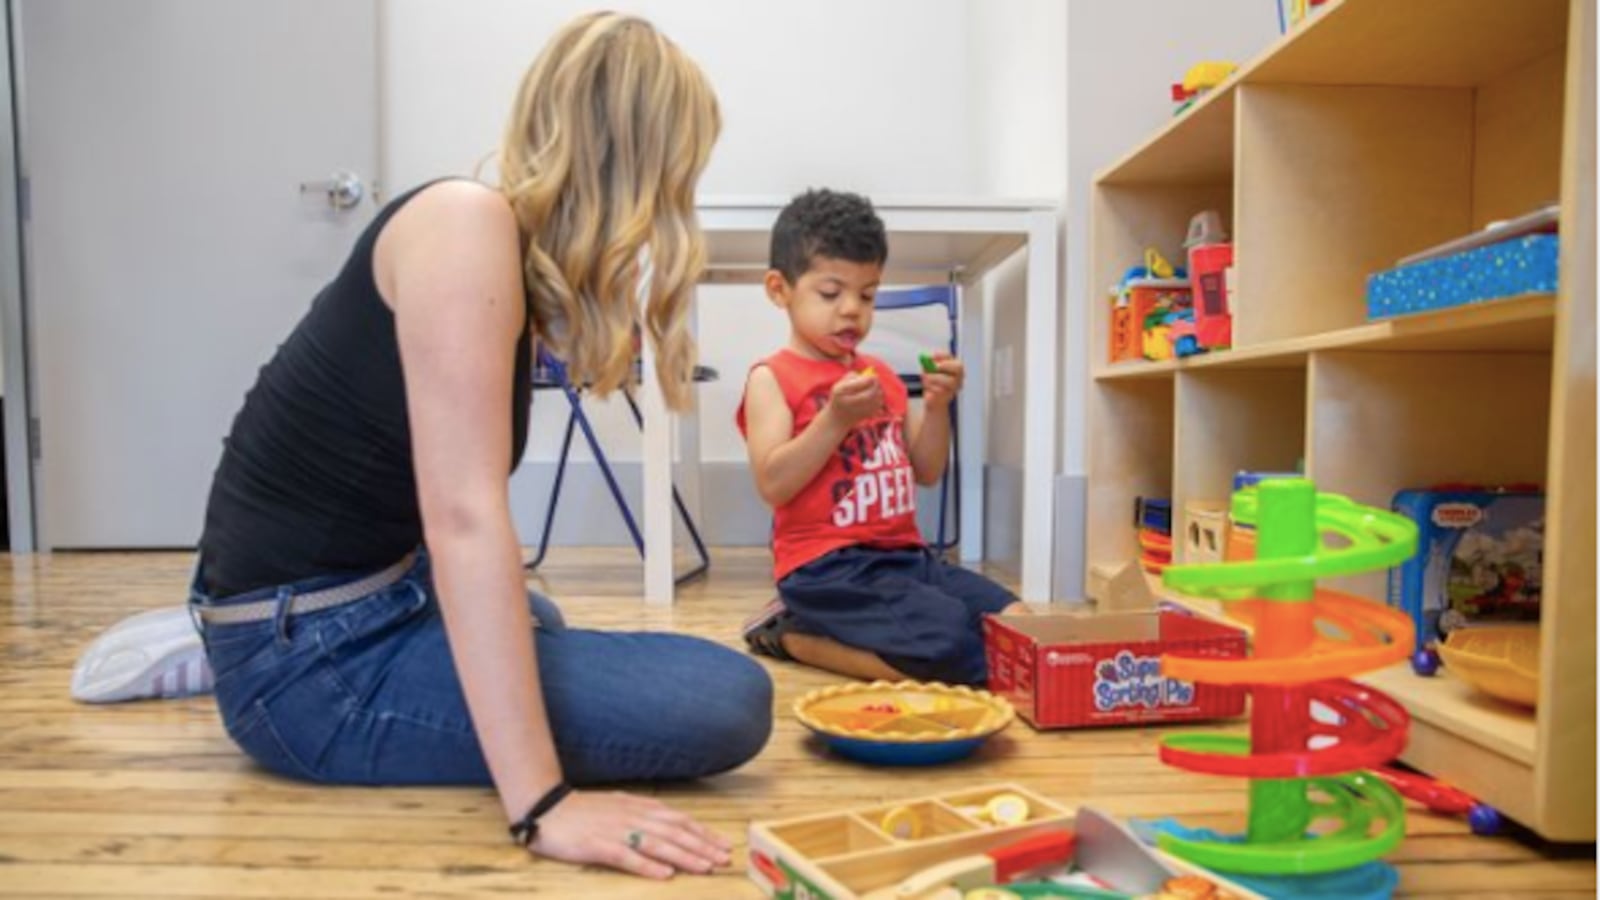 Behavioral therapist Meghan Devine works with 4-year-old Joaquin Rodriguez at the Bridge Kids special education center in Chelsea, June 28, 2019.